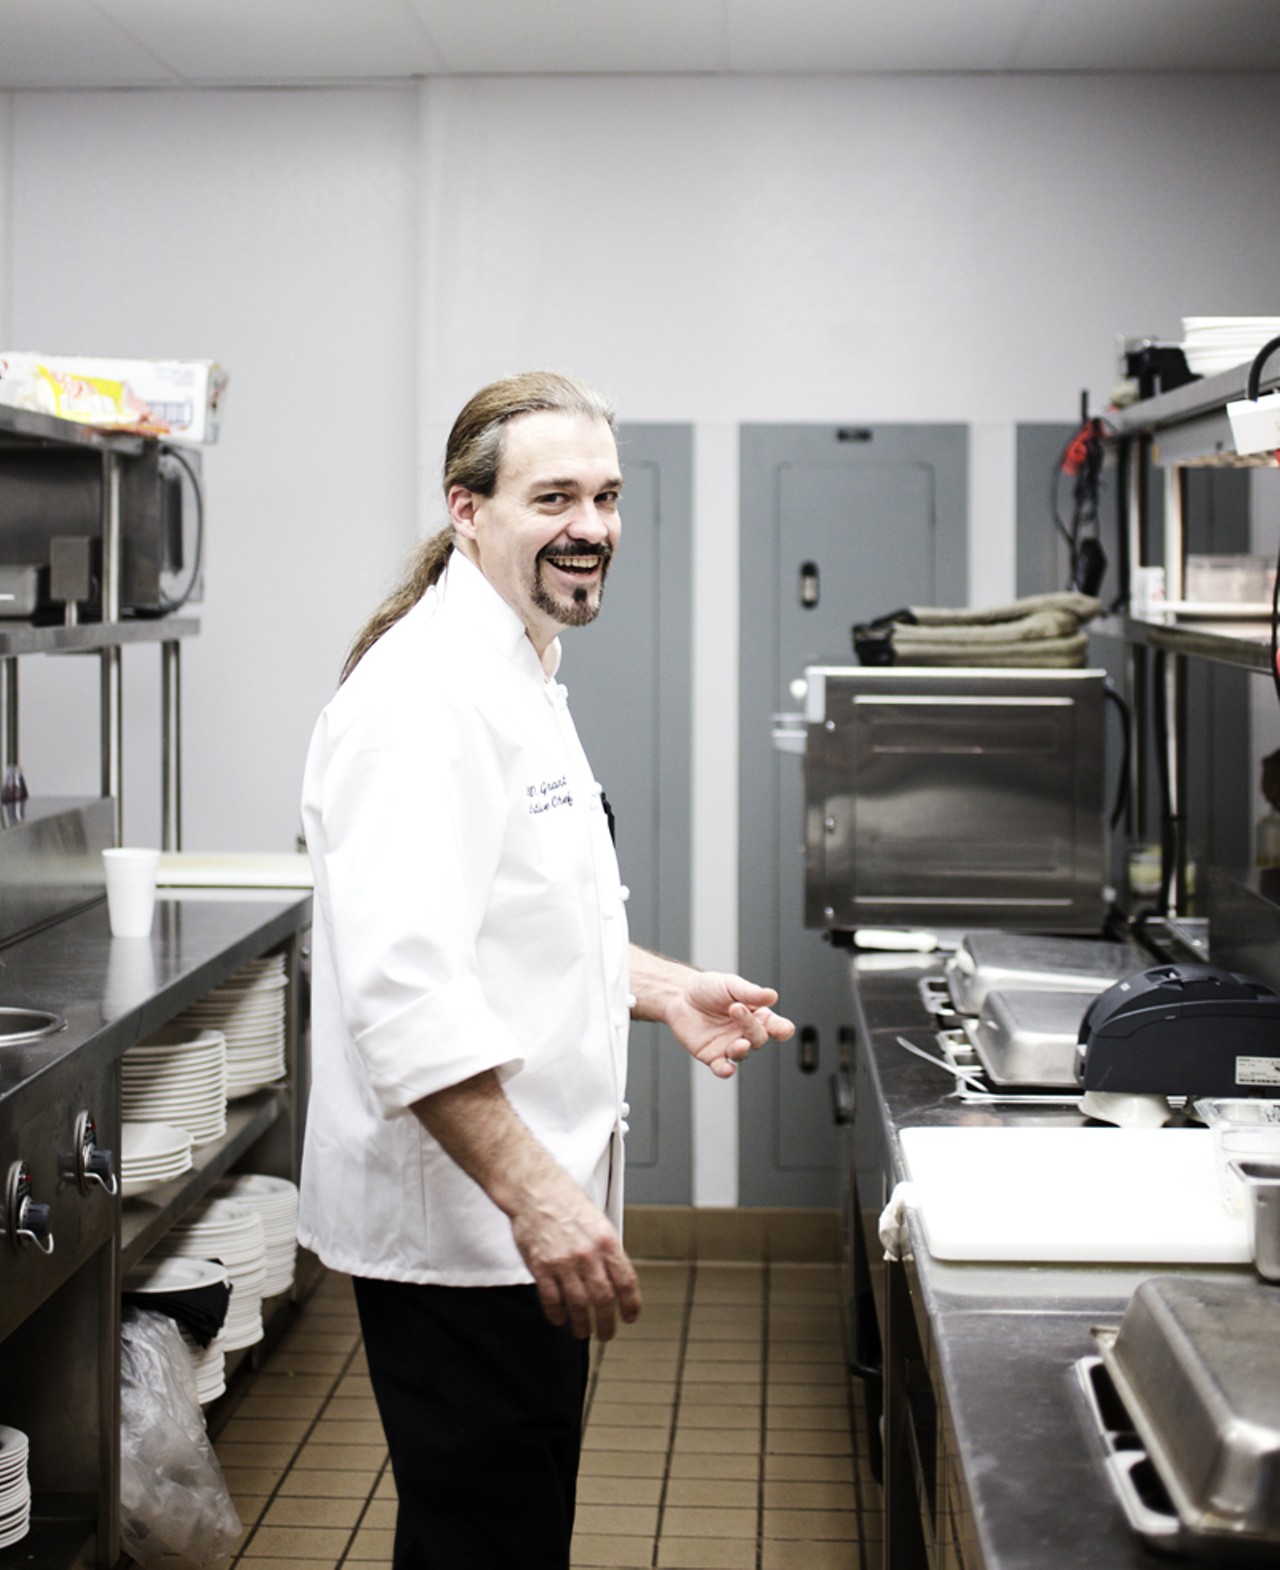 Executive Chef Brian Duffy Grant in the kitchen at Shula's 347.